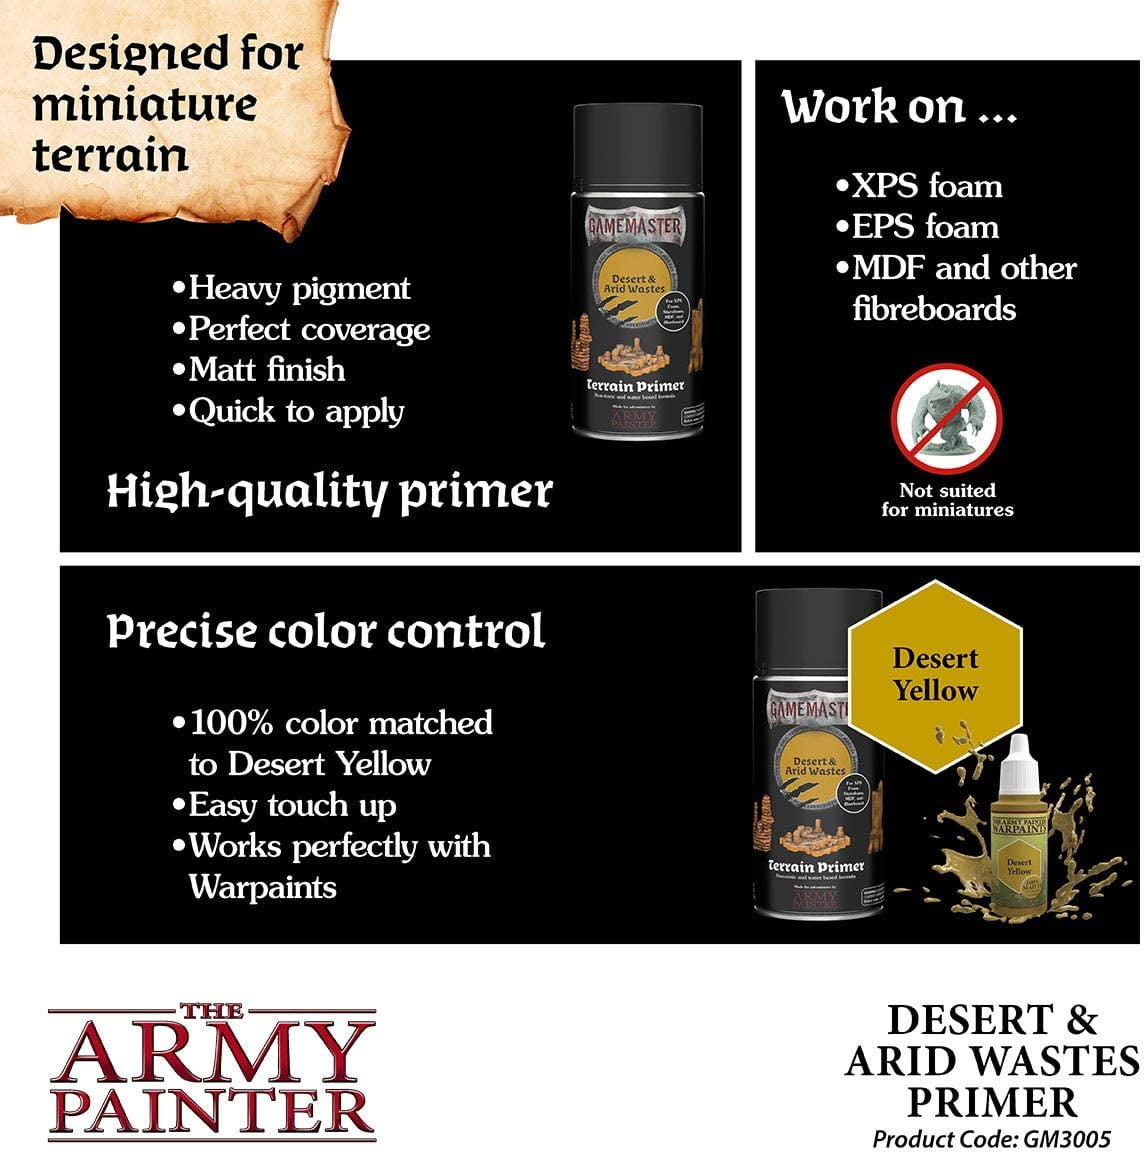 The Army Painter Uniform Grey Warpaint - Acrylic Non-Toxic Heavily  Pigmented Water Based Paint for Tabletop Roleplaying, Boardgames, and  Wargames